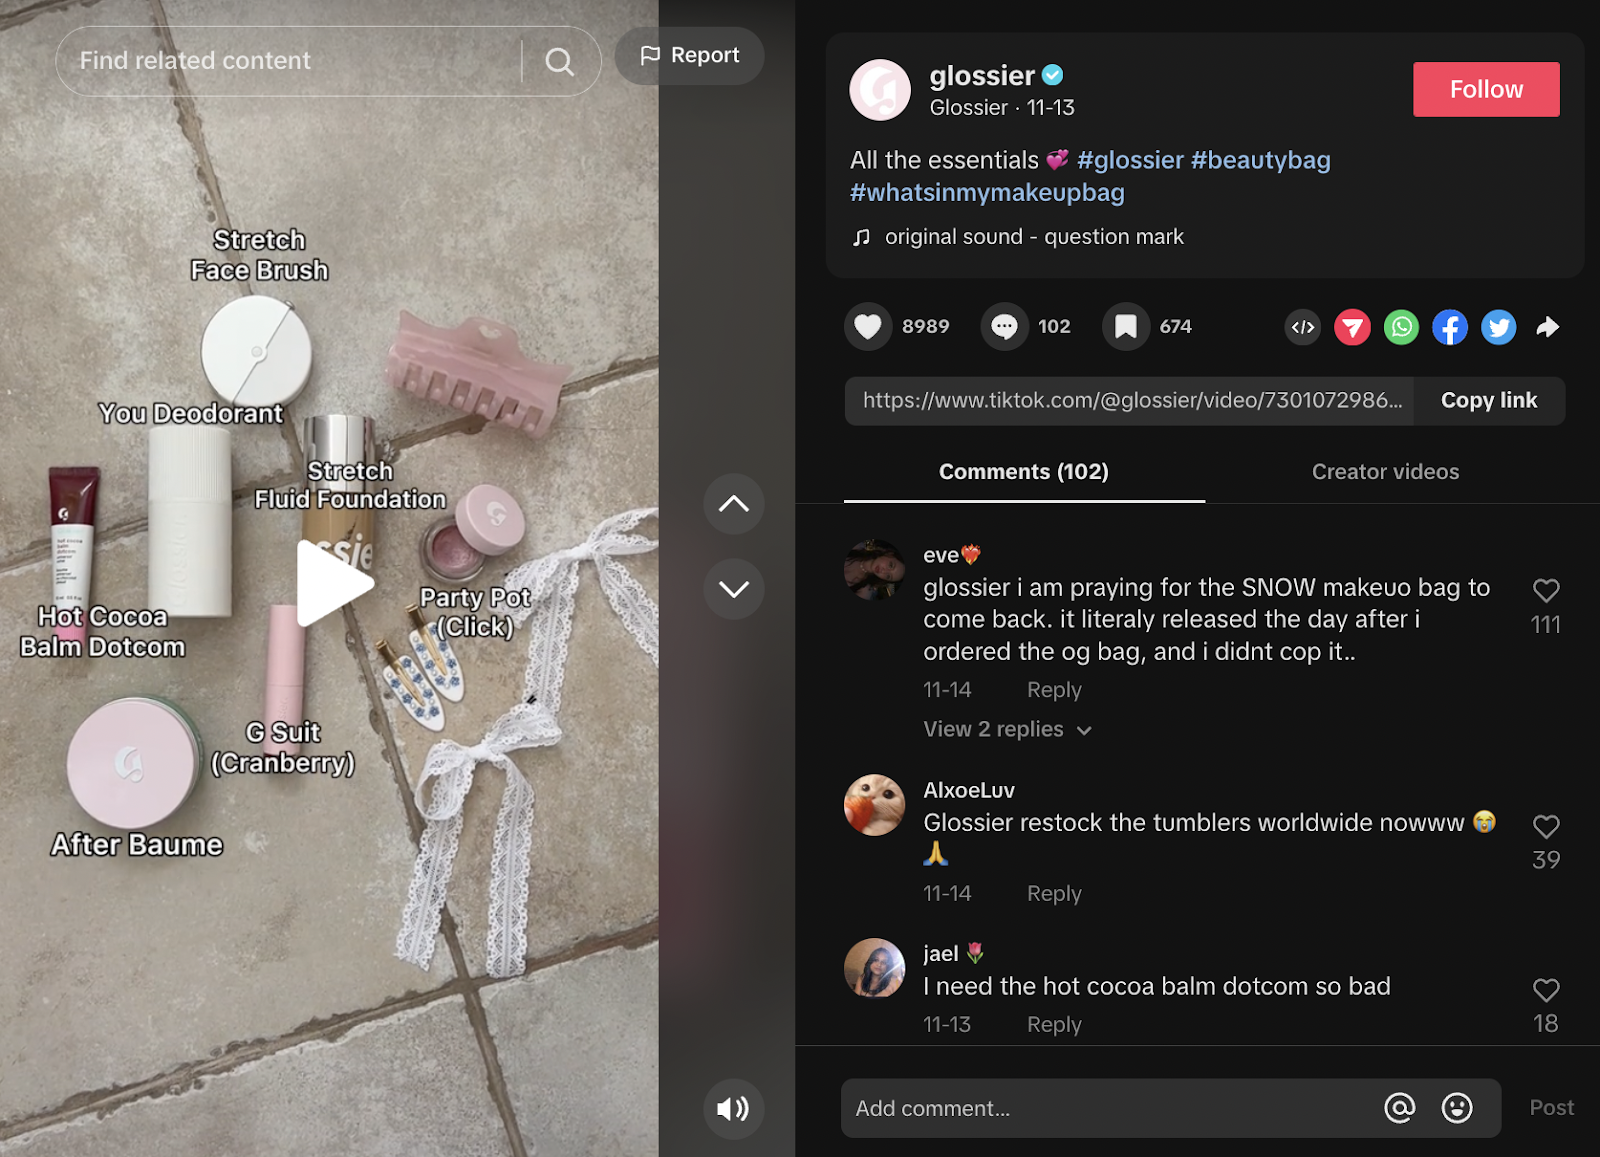 Screenshot of Glossier’s TikTok showing a mix of different content.